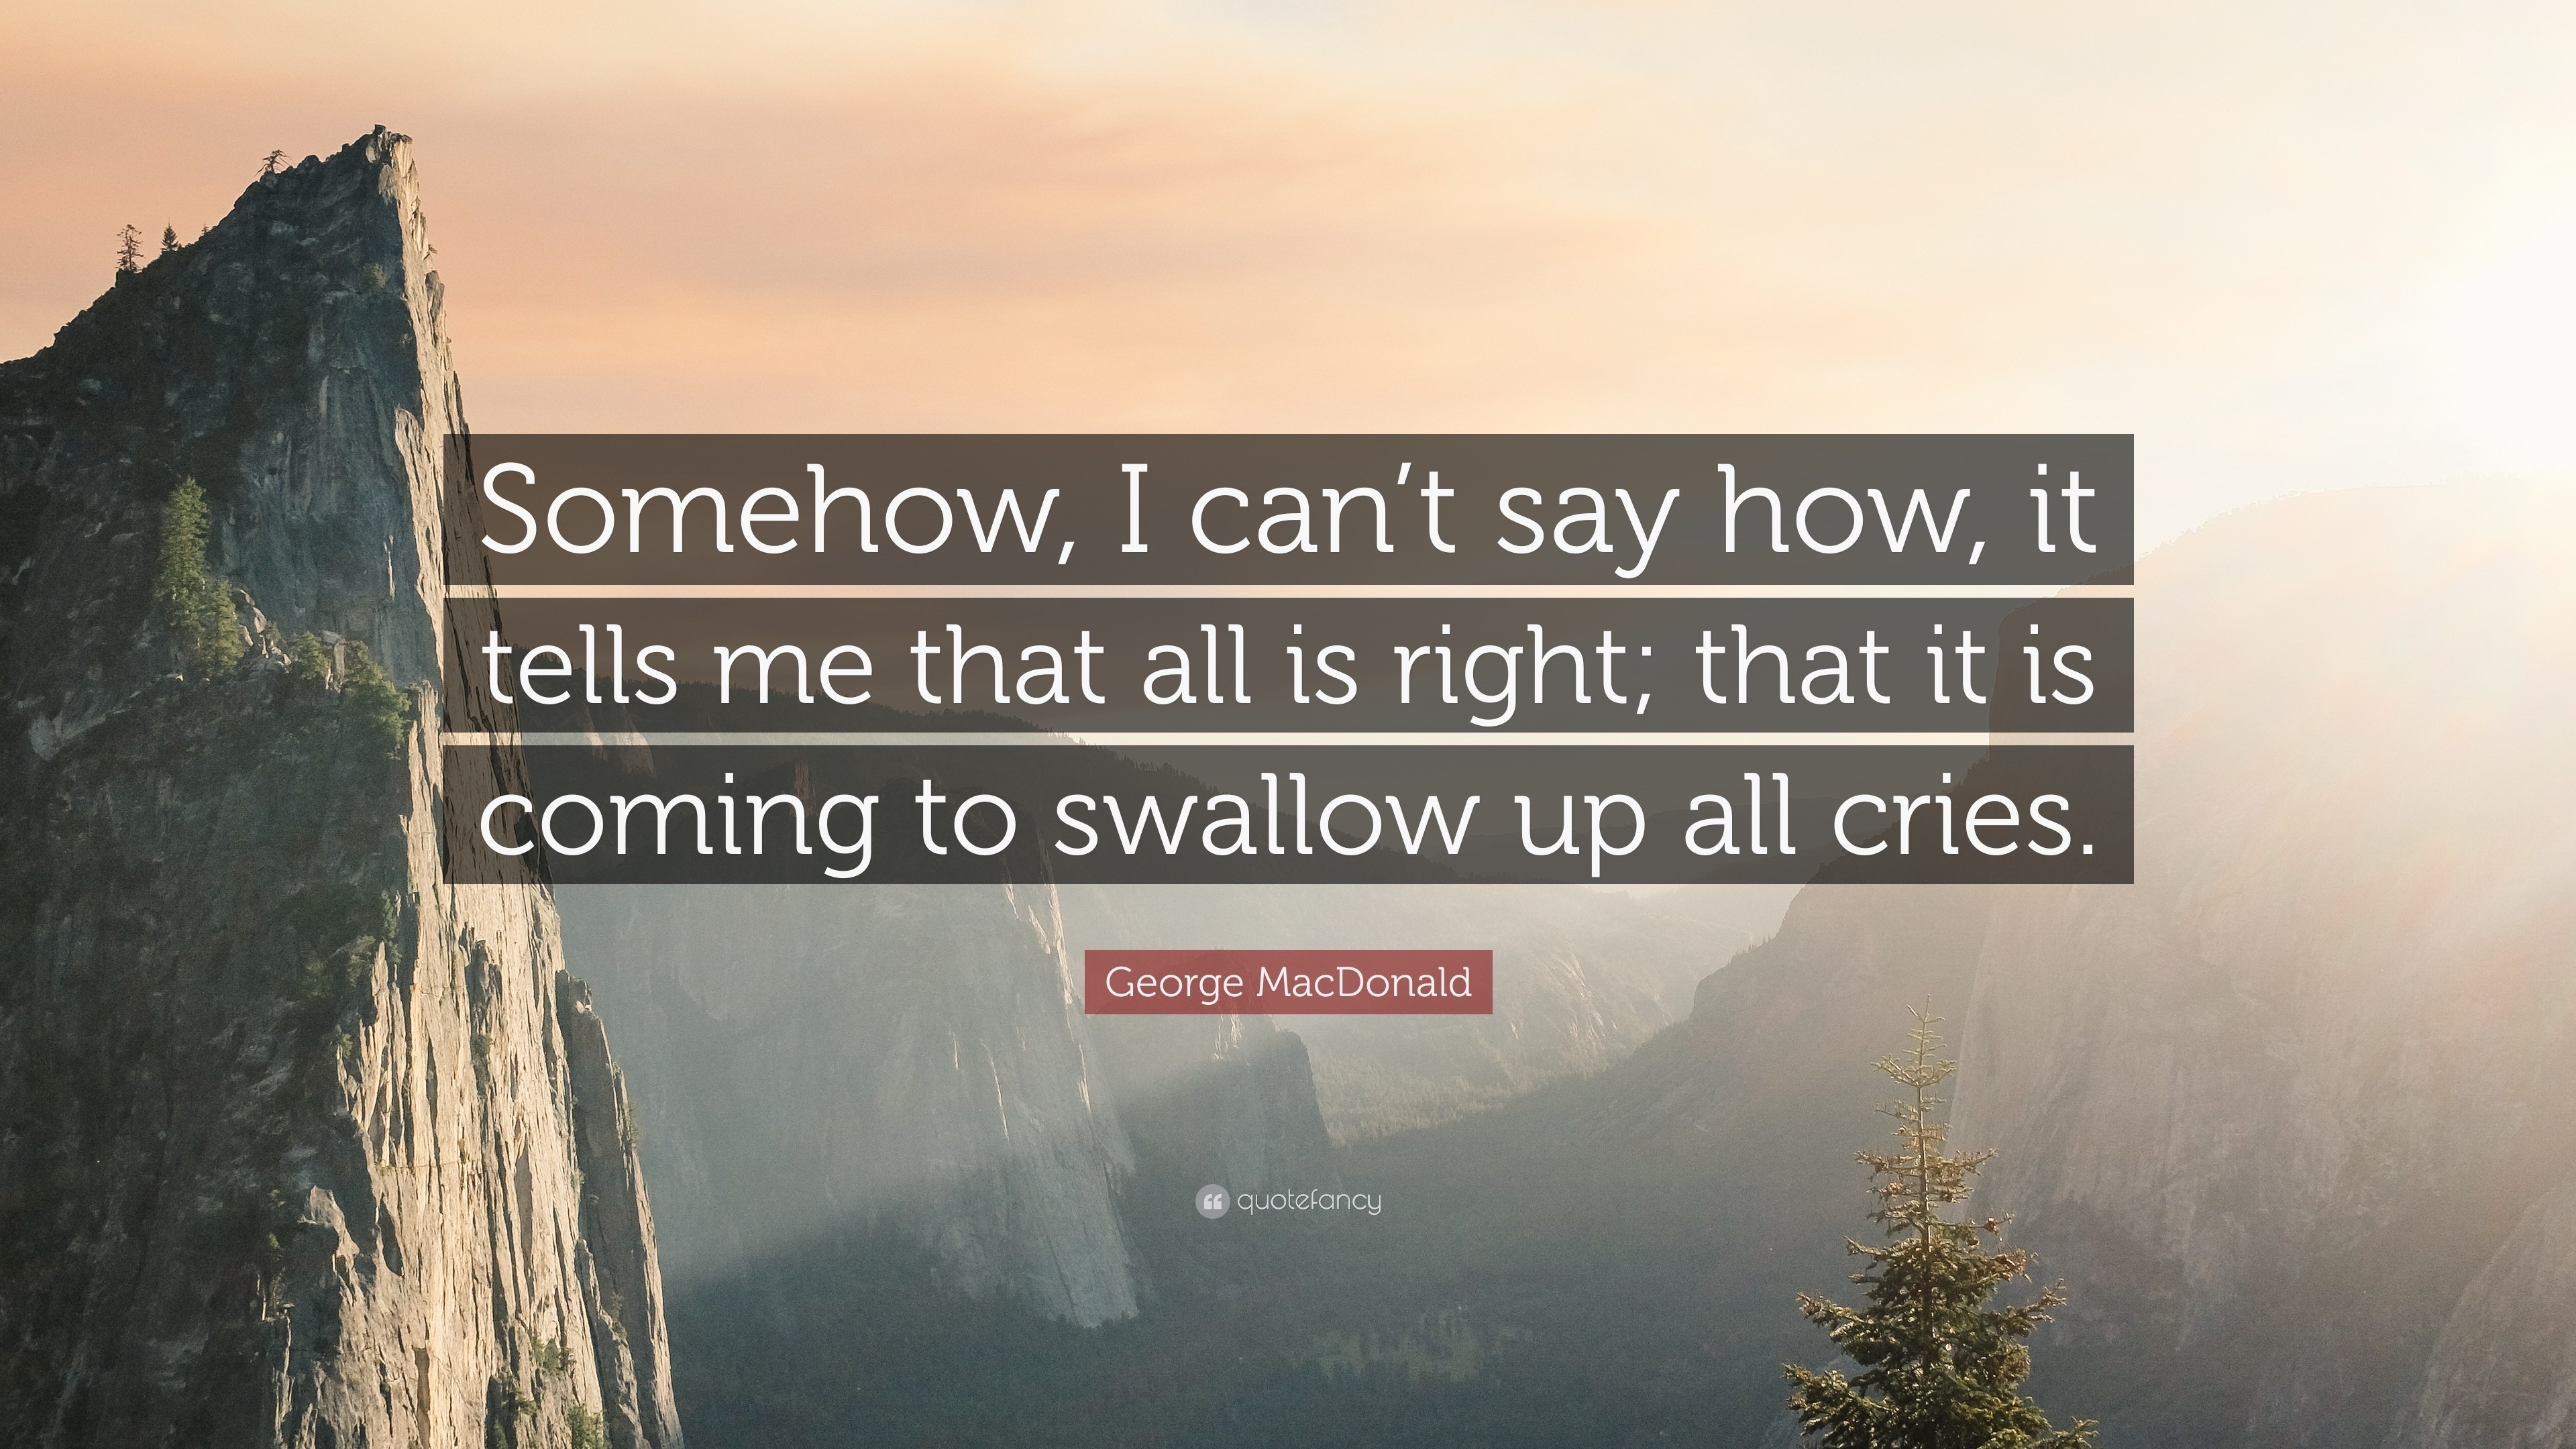 George Macdonald Quote Somehow I Can T Say How It Tells Me That All Is Right That It Is Coming To Swallow Up All Cries 6 Wallpapers Quotefancy